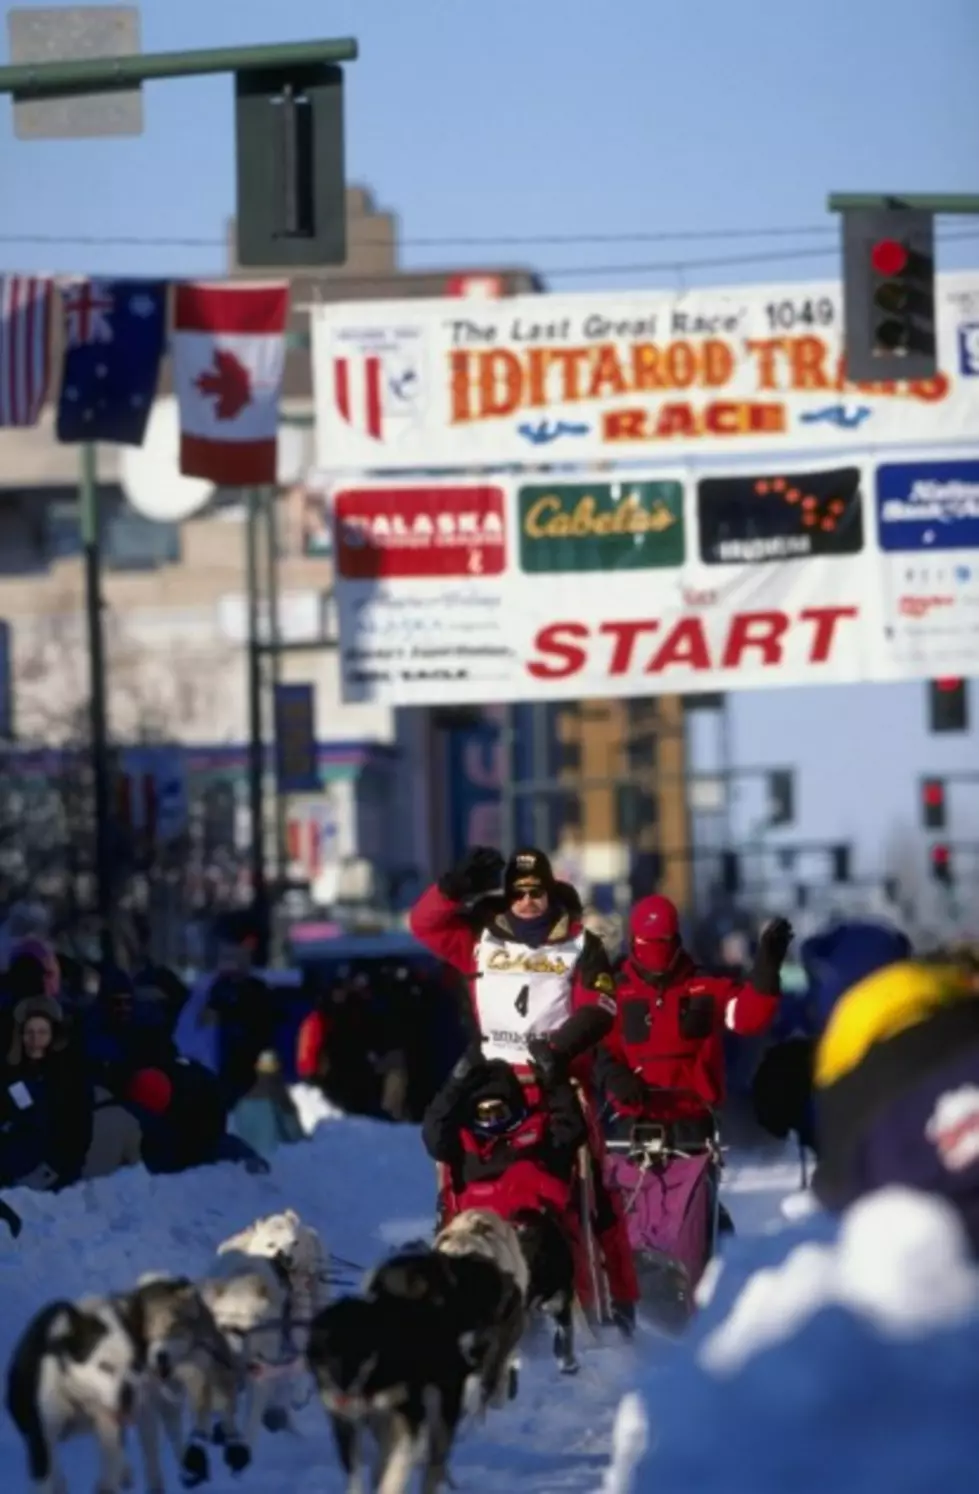 Tell Me How the Iditarod is a Sport [VIDEO]